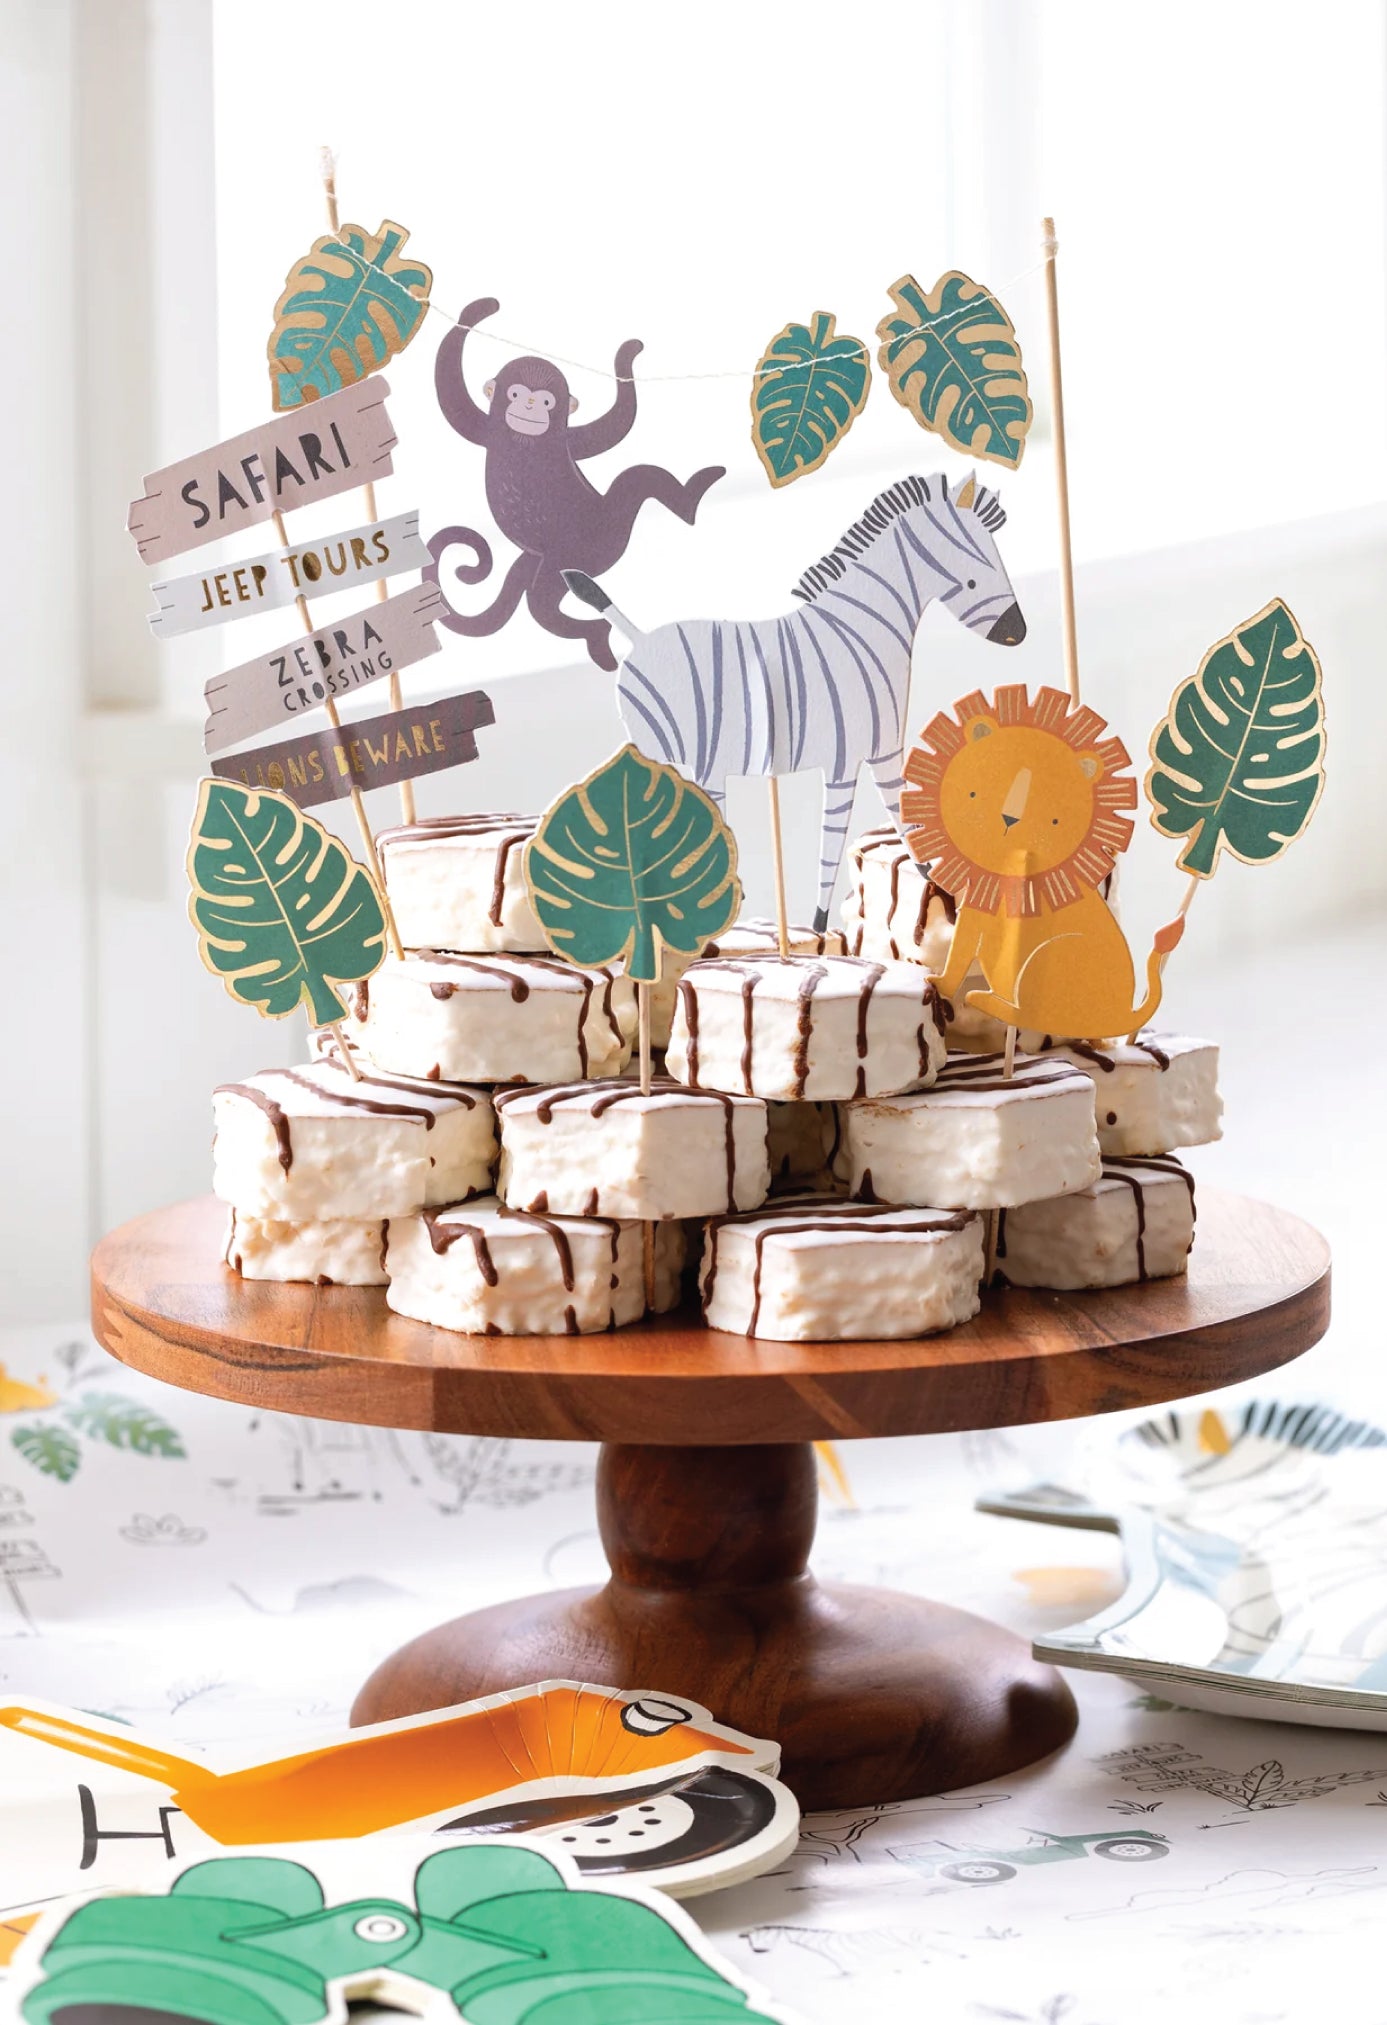 Safari Jeep Tour Cake Toppers 8ct | The Party Darling